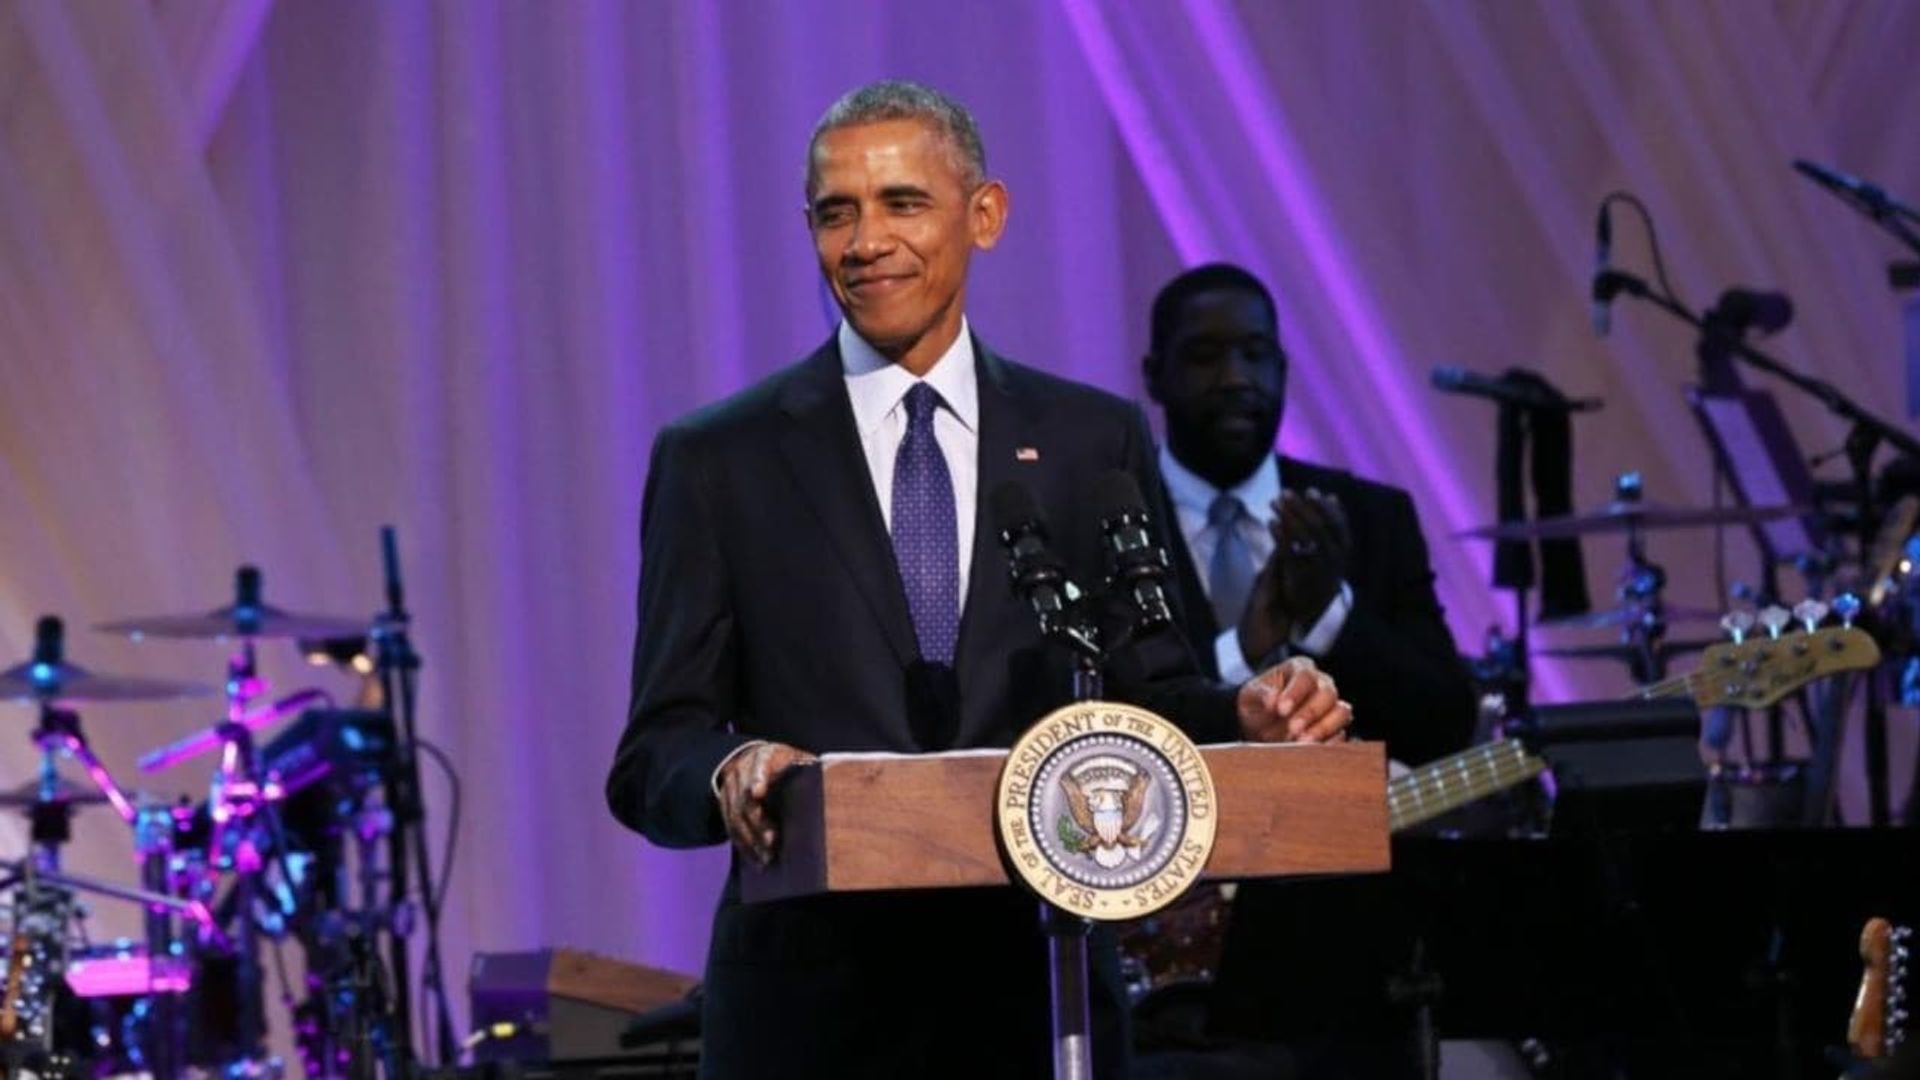 BET Presents Love & Happiness: An Obama Celebration background